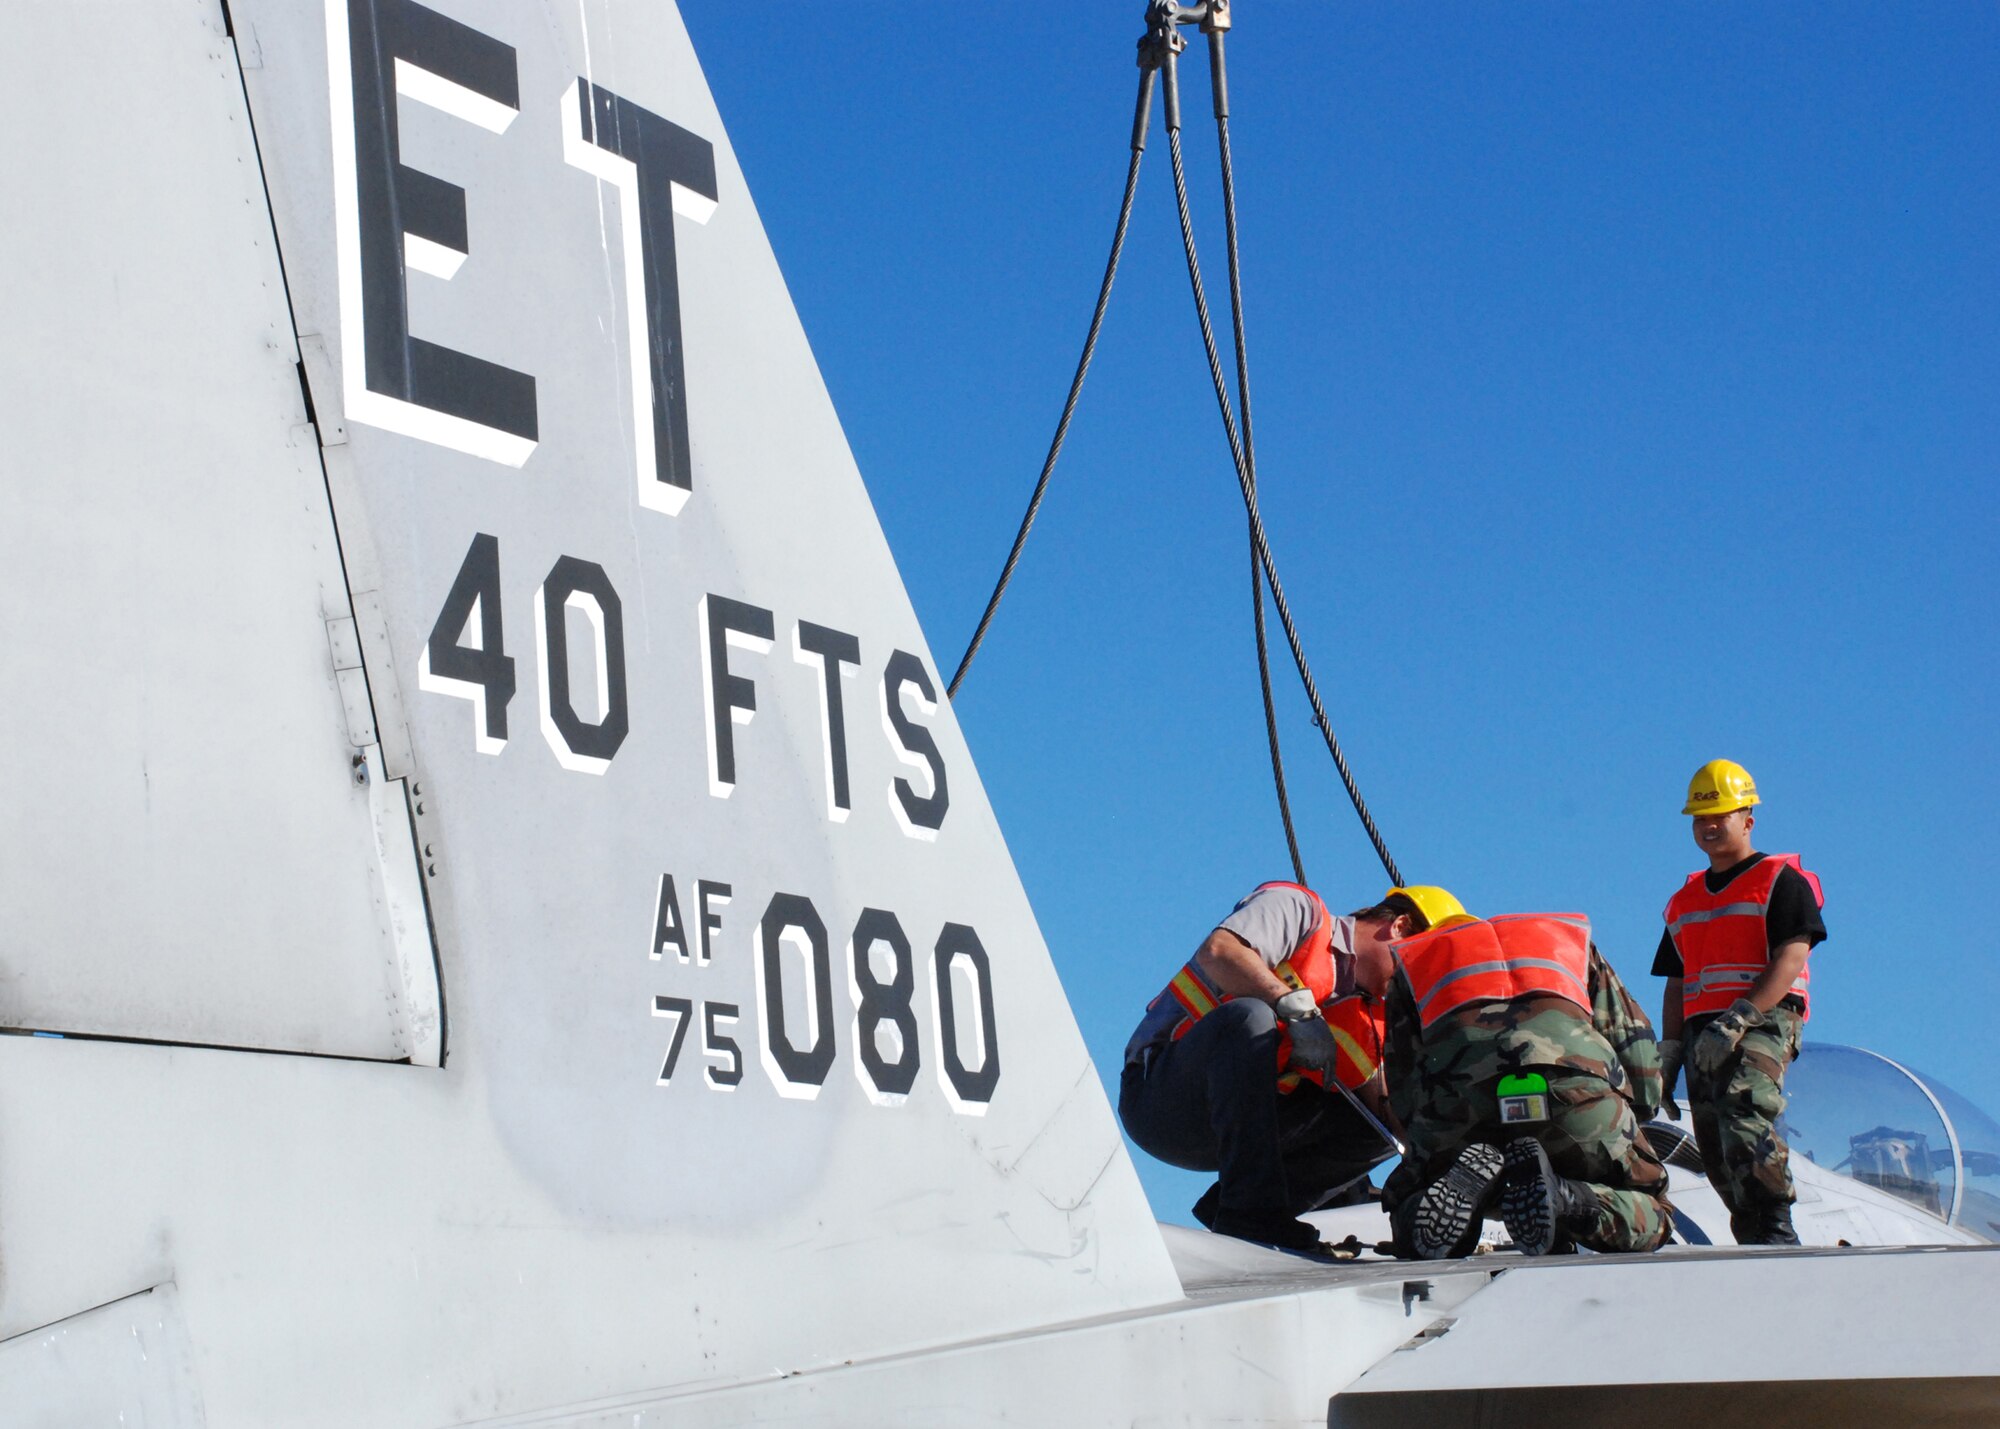 EGLIN AIR FORCE, Fla. -- Members of the 33rd Maintenance Sqaudron help secure the cables to an F-15 to be hoisted by a crane and loaded onto a flatbed trainler for transport Oct. 12. Indyne Inc. U.S. Targets and the 46th Test Wing is moving the F-15 to Range 52 for future testing missions.The crew, lifted the aircraft, collapsed the landing gear and hoisted it onto a flatbed trailer to be transported to Range 52 off Range Road 213. They are scheduled to move the jet beginning at 2 a.m. Oct. 13. (U.S Air Force Photo by Staff Sgt. Mike Meares)